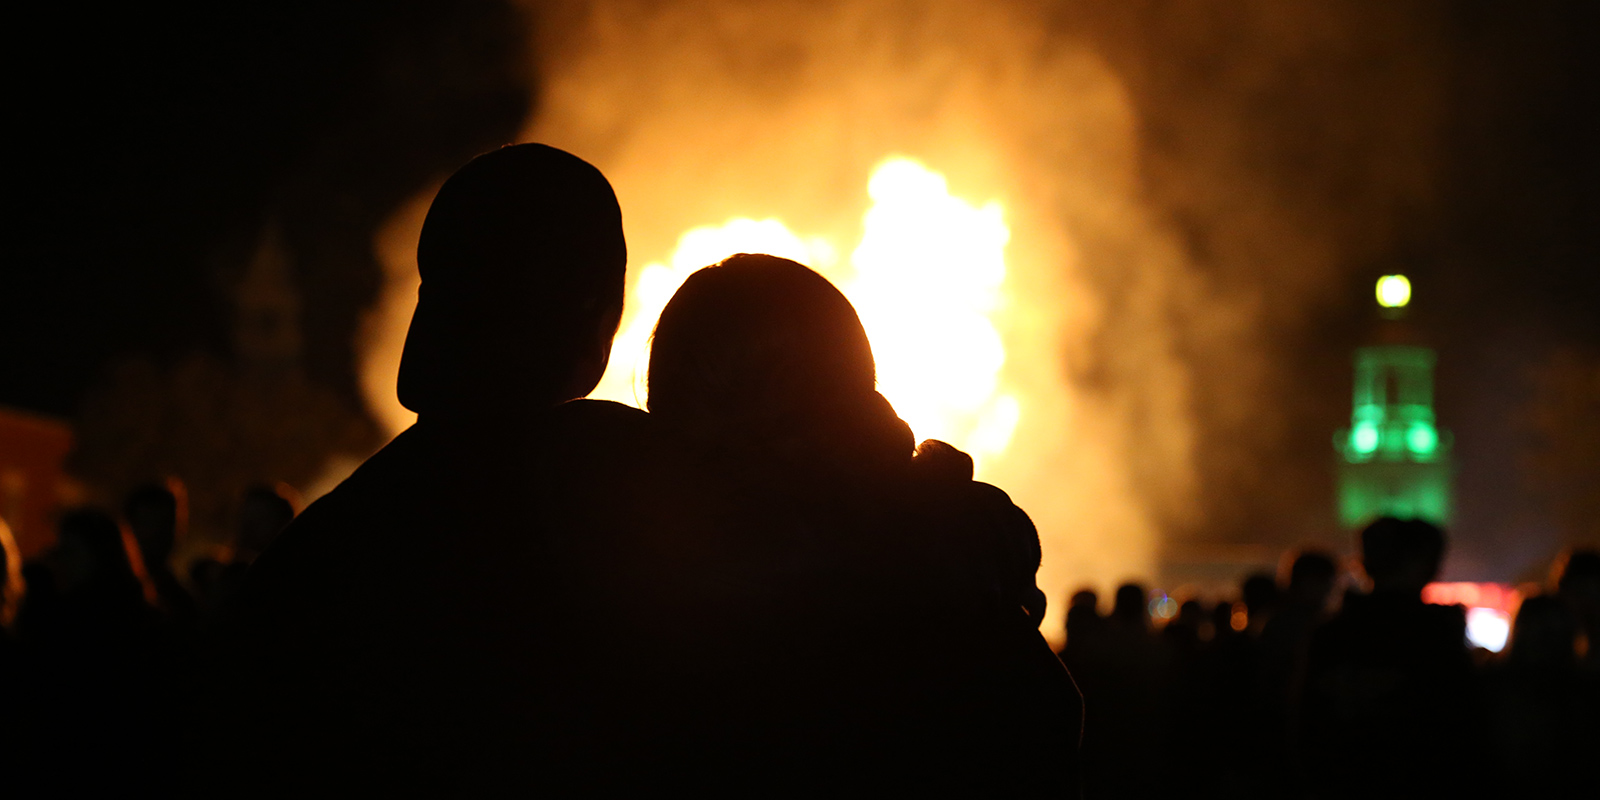 Silhouettes of two people in front of the Homecoming bonfire